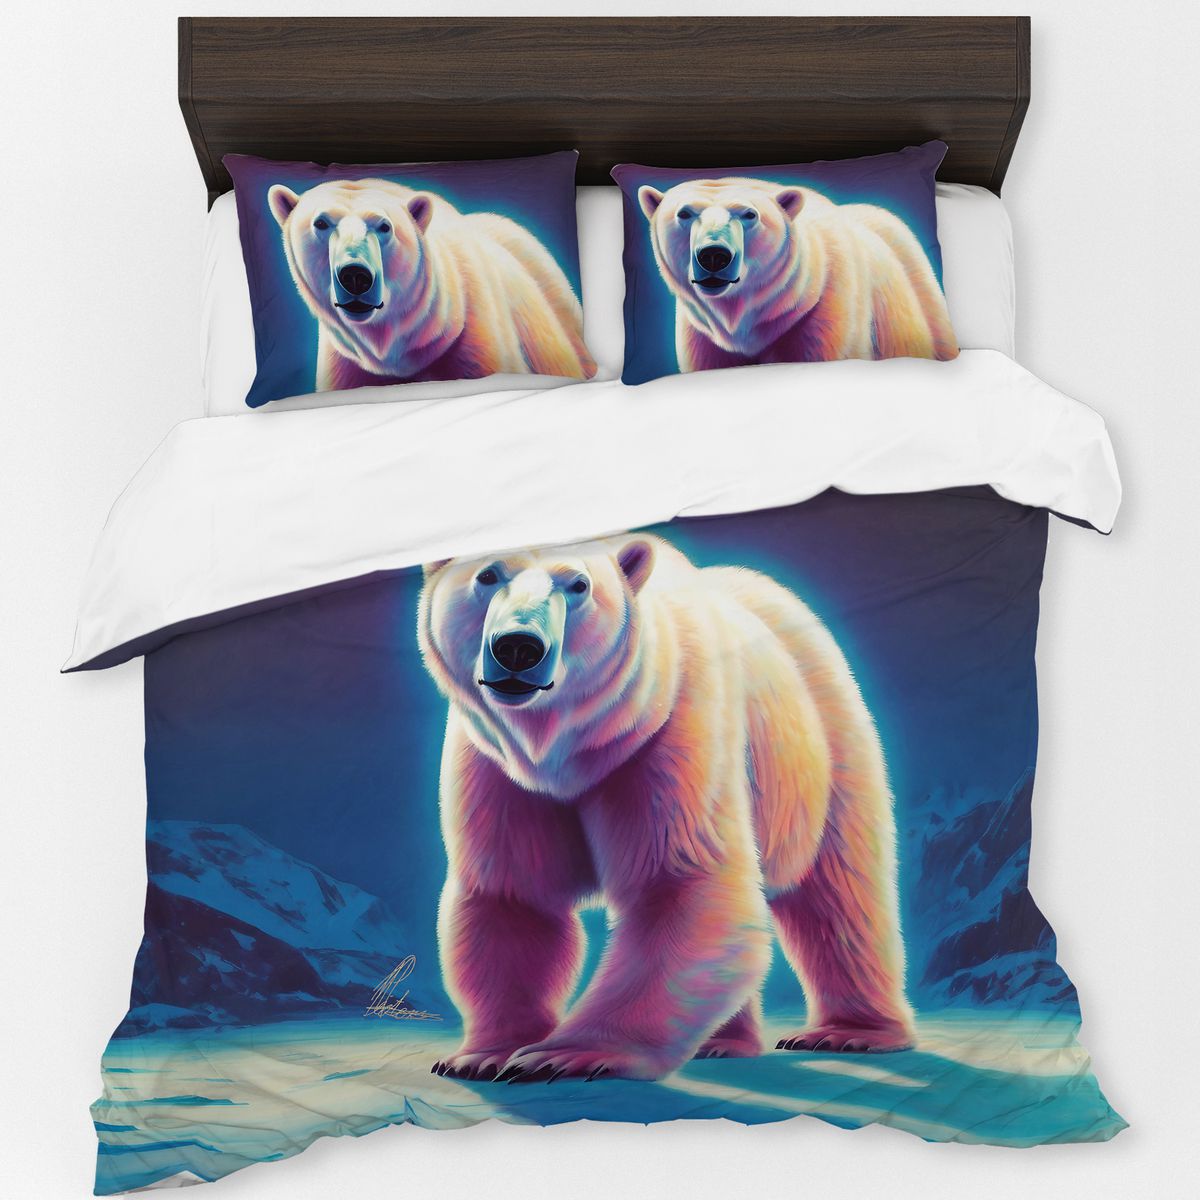 Just Chill Polar Bear By Nathan Pieterse Duvet Cover Set